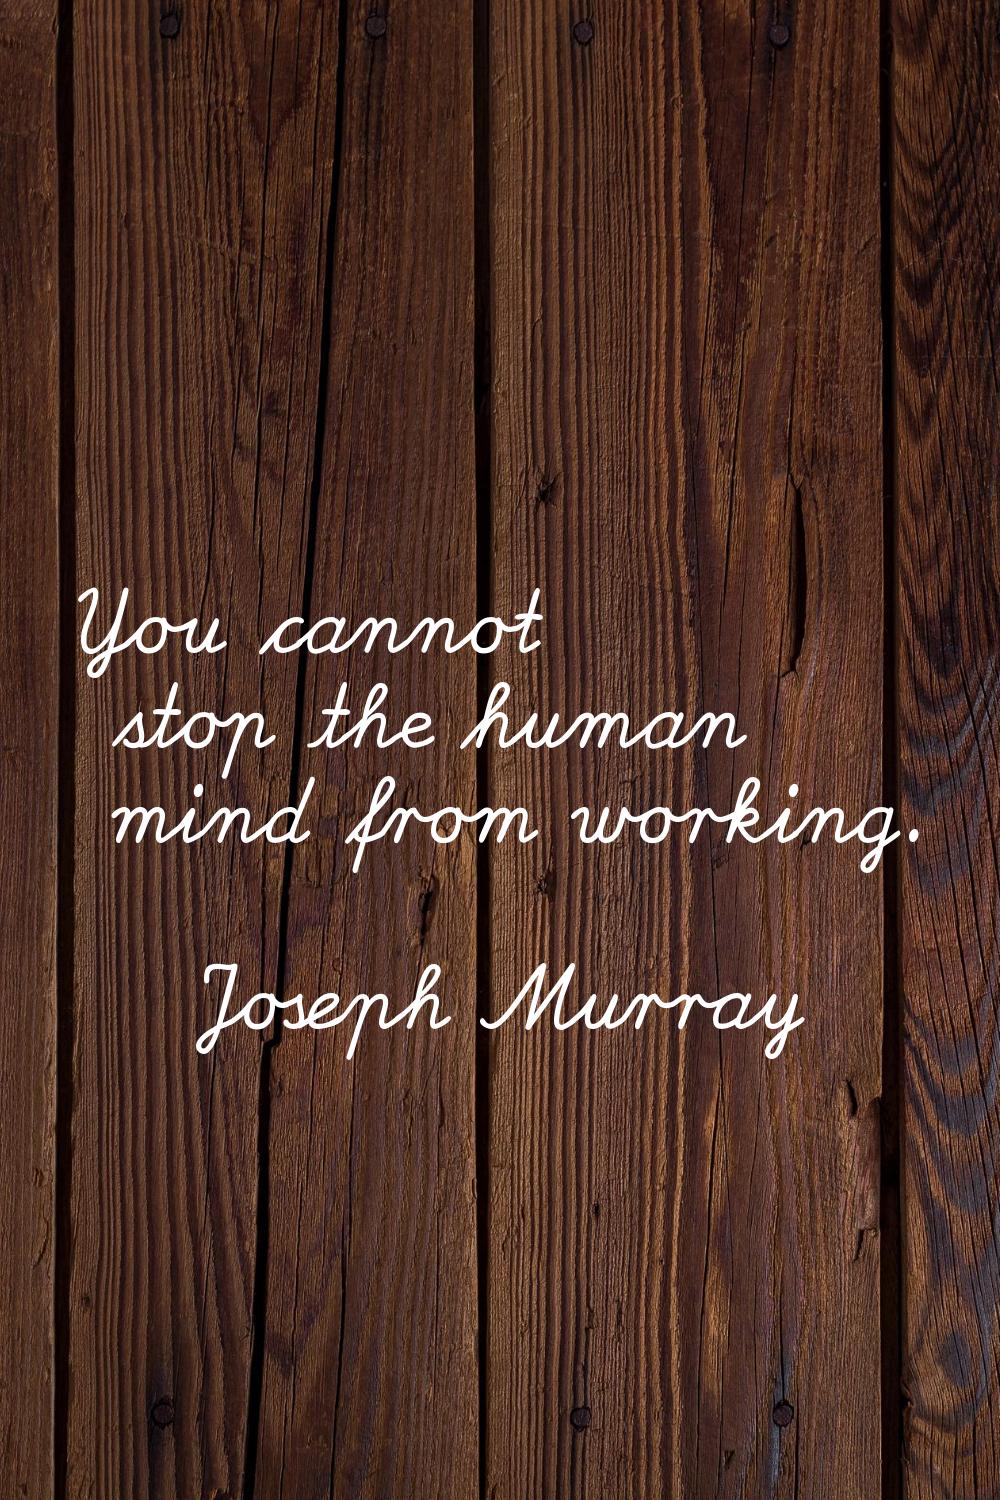 You cannot stop the human mind from working.